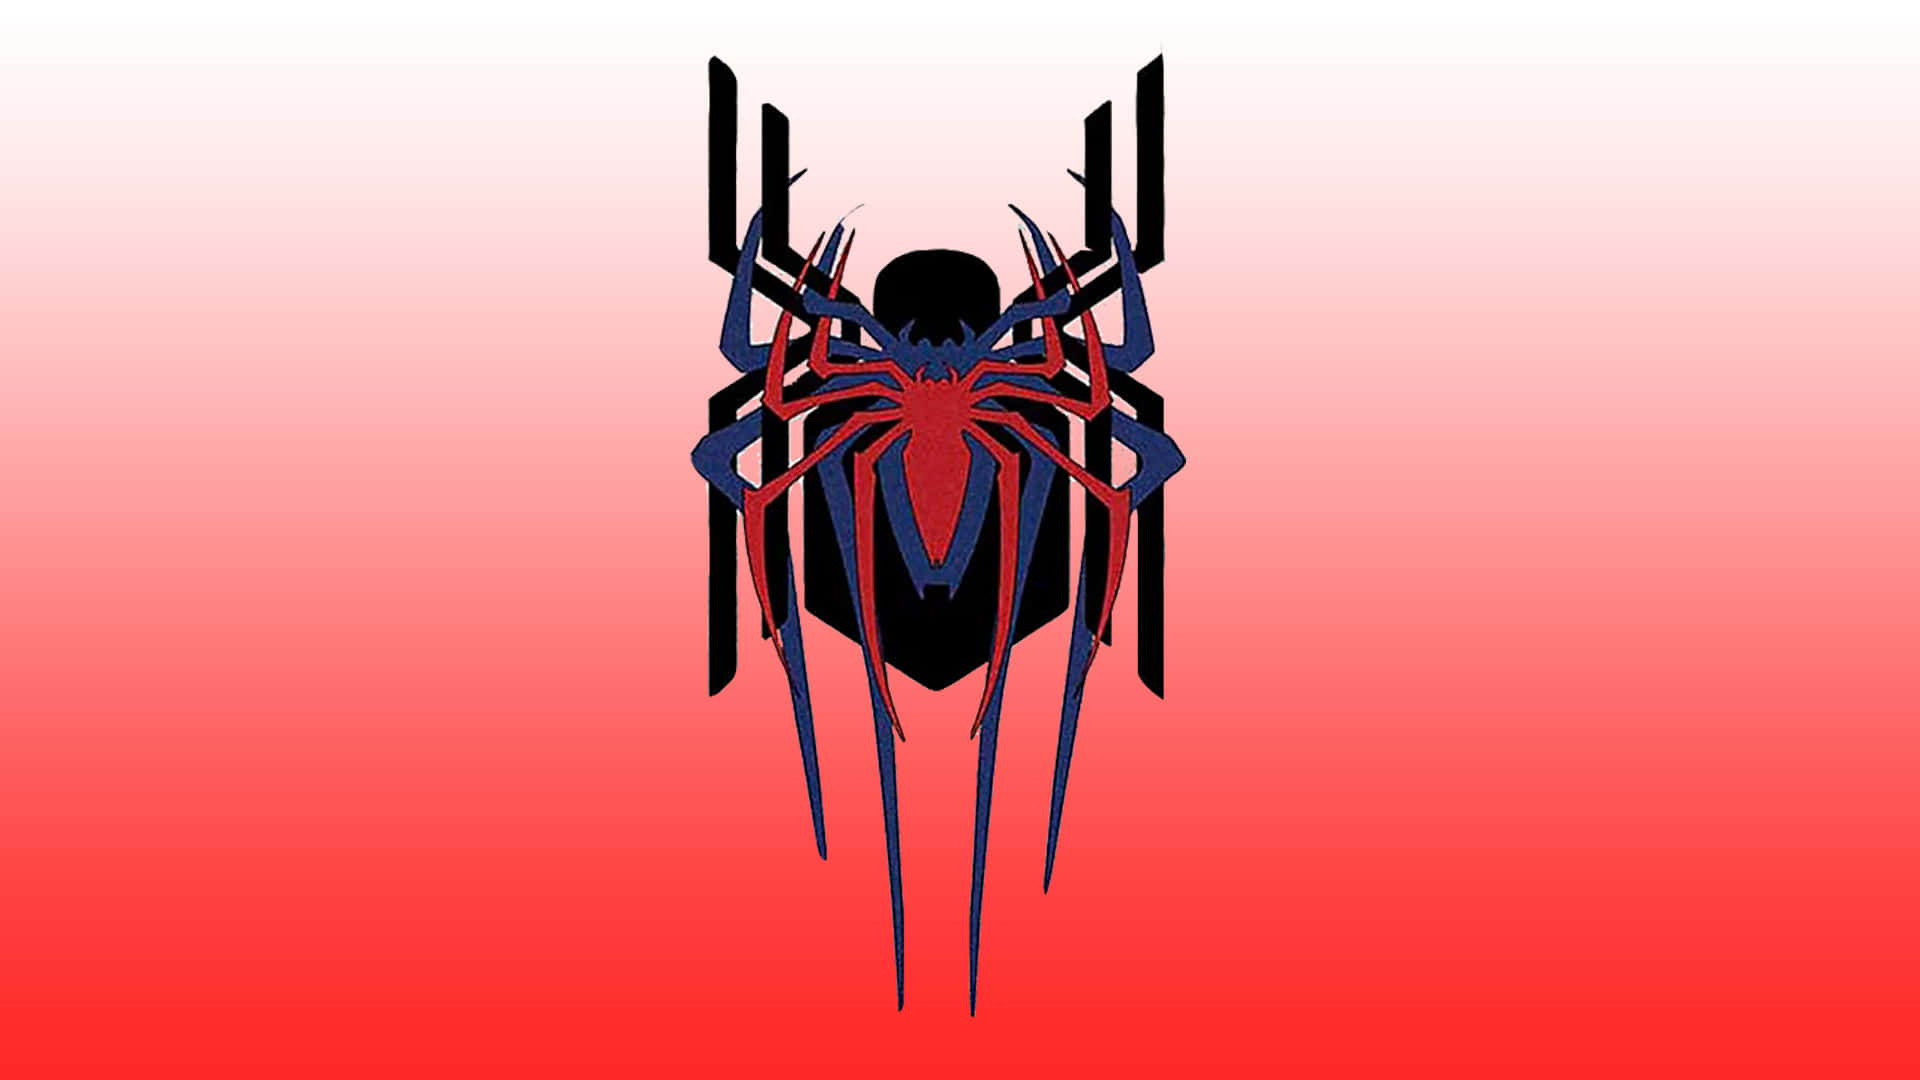 The Spider - Man Logo On A Red Background Wallpaper